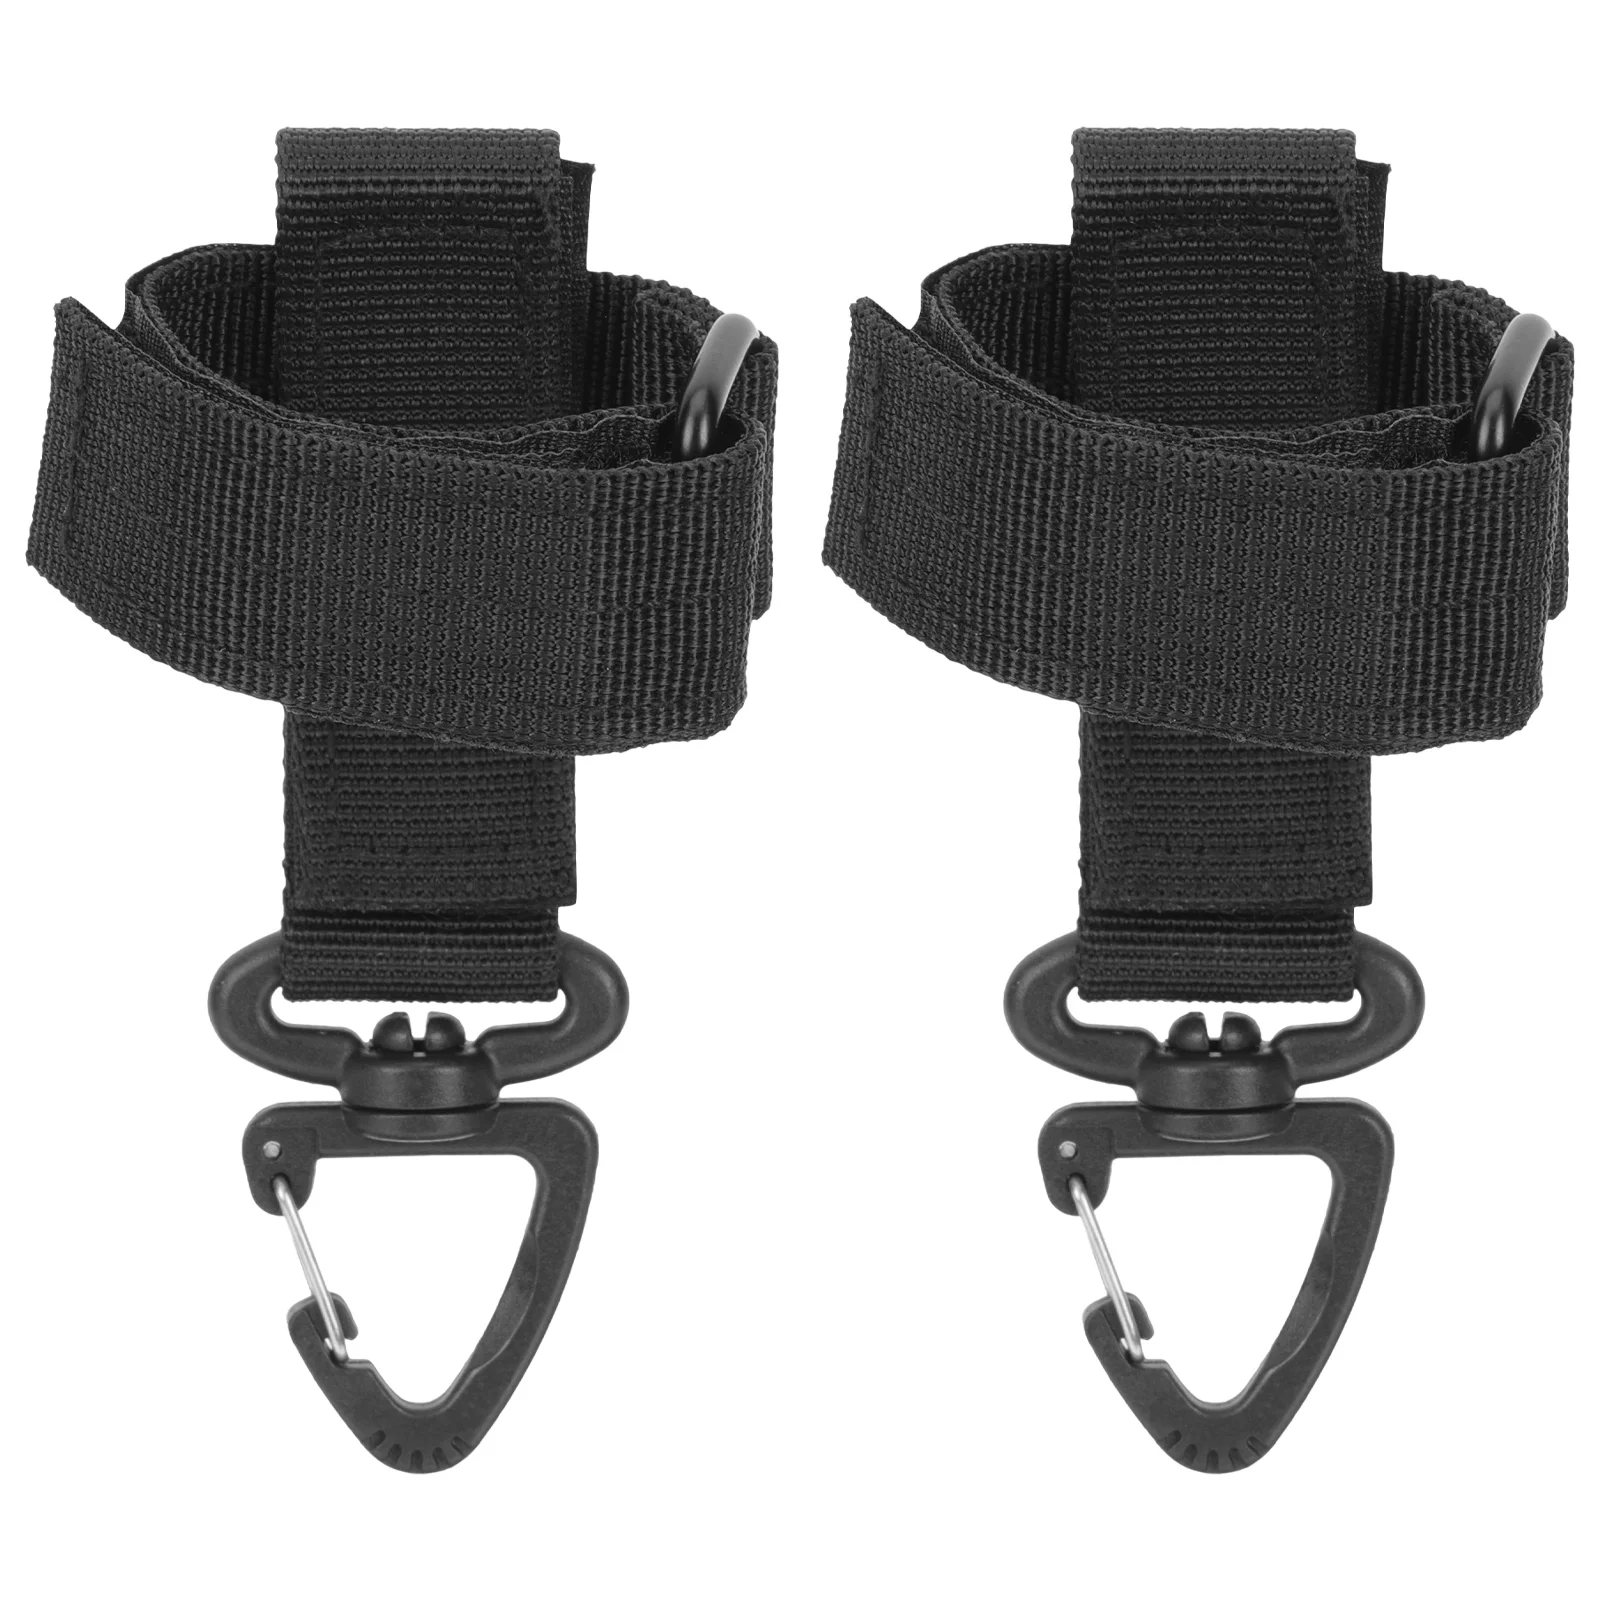 

2Pcs Outdoor Portable Hiking Convenient Camping Glove Strap Glove Holder Glove Leash Glove Holders for Camping Holding